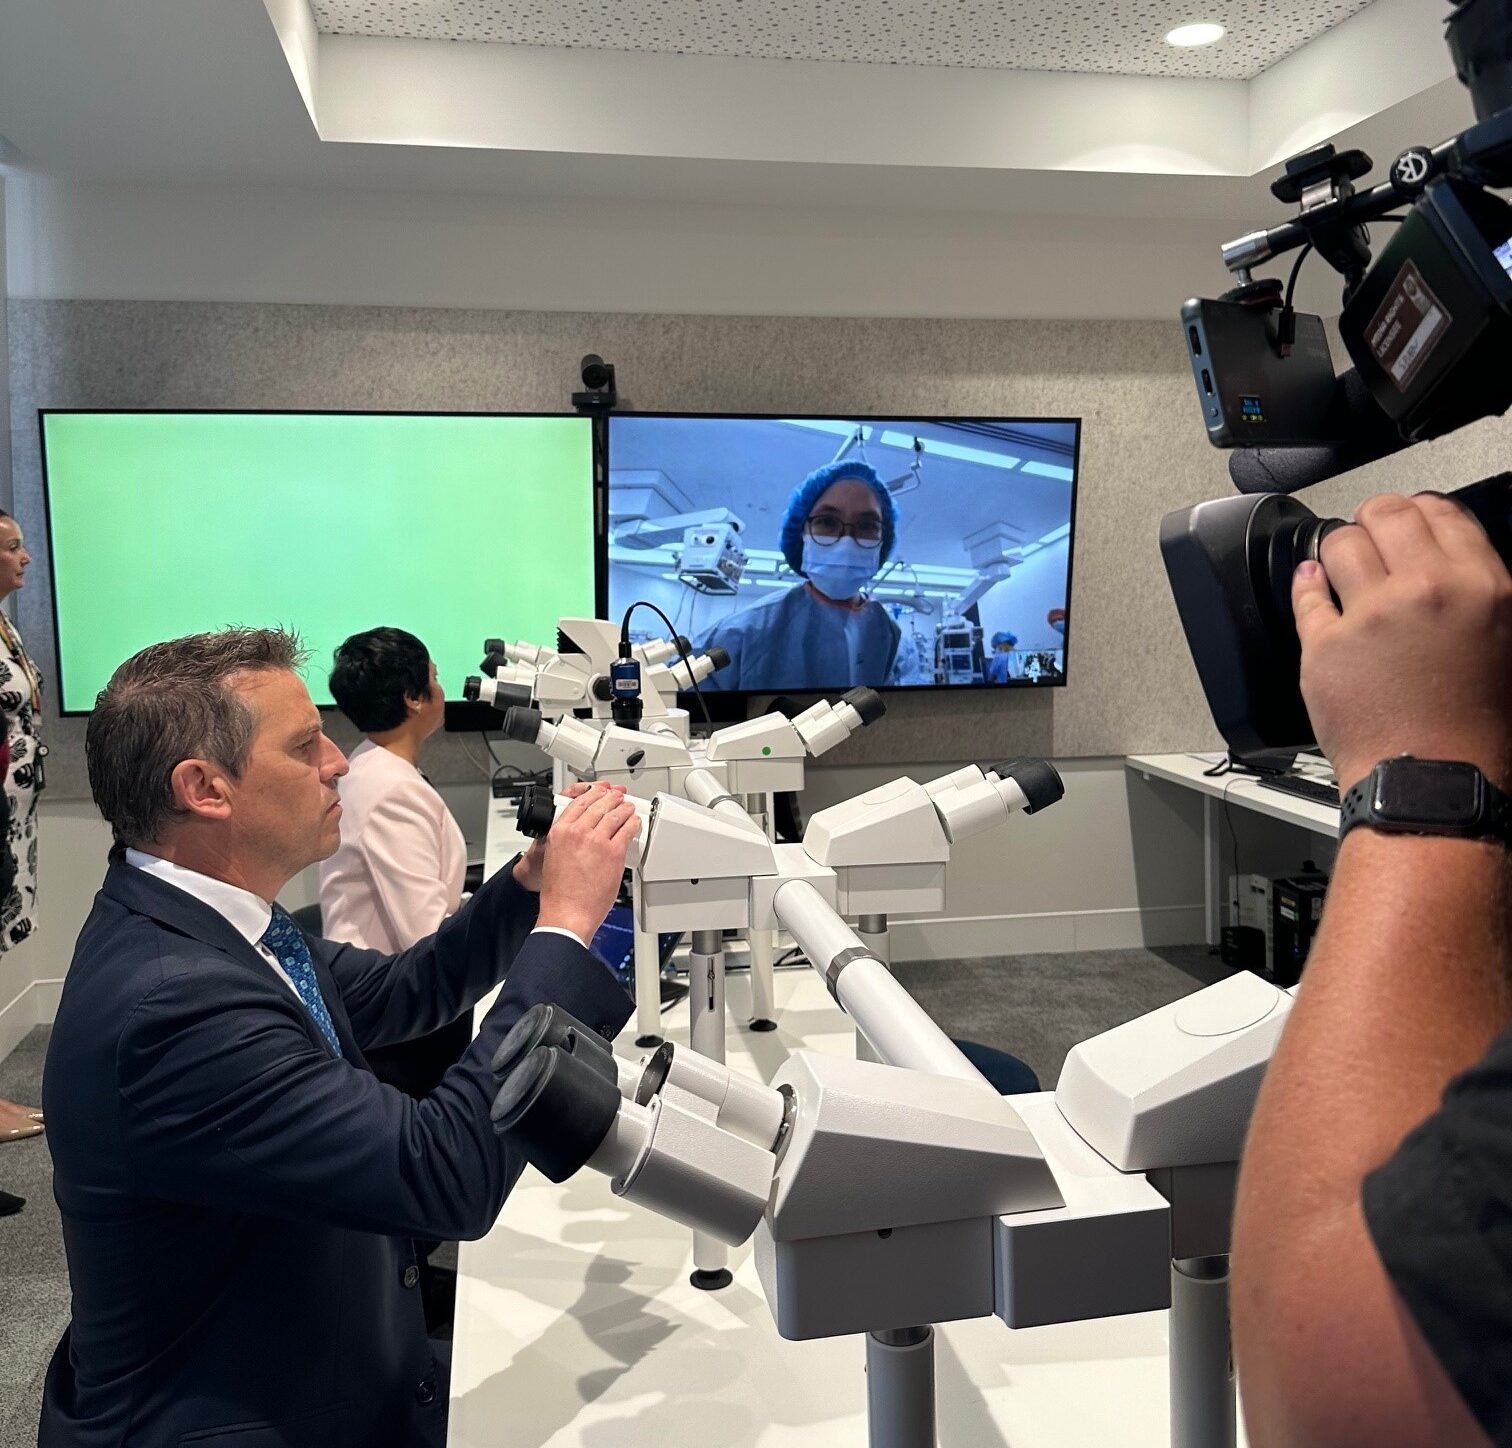 The Minister looking at a microscope, while a surgeon appears on a video screen in the background.